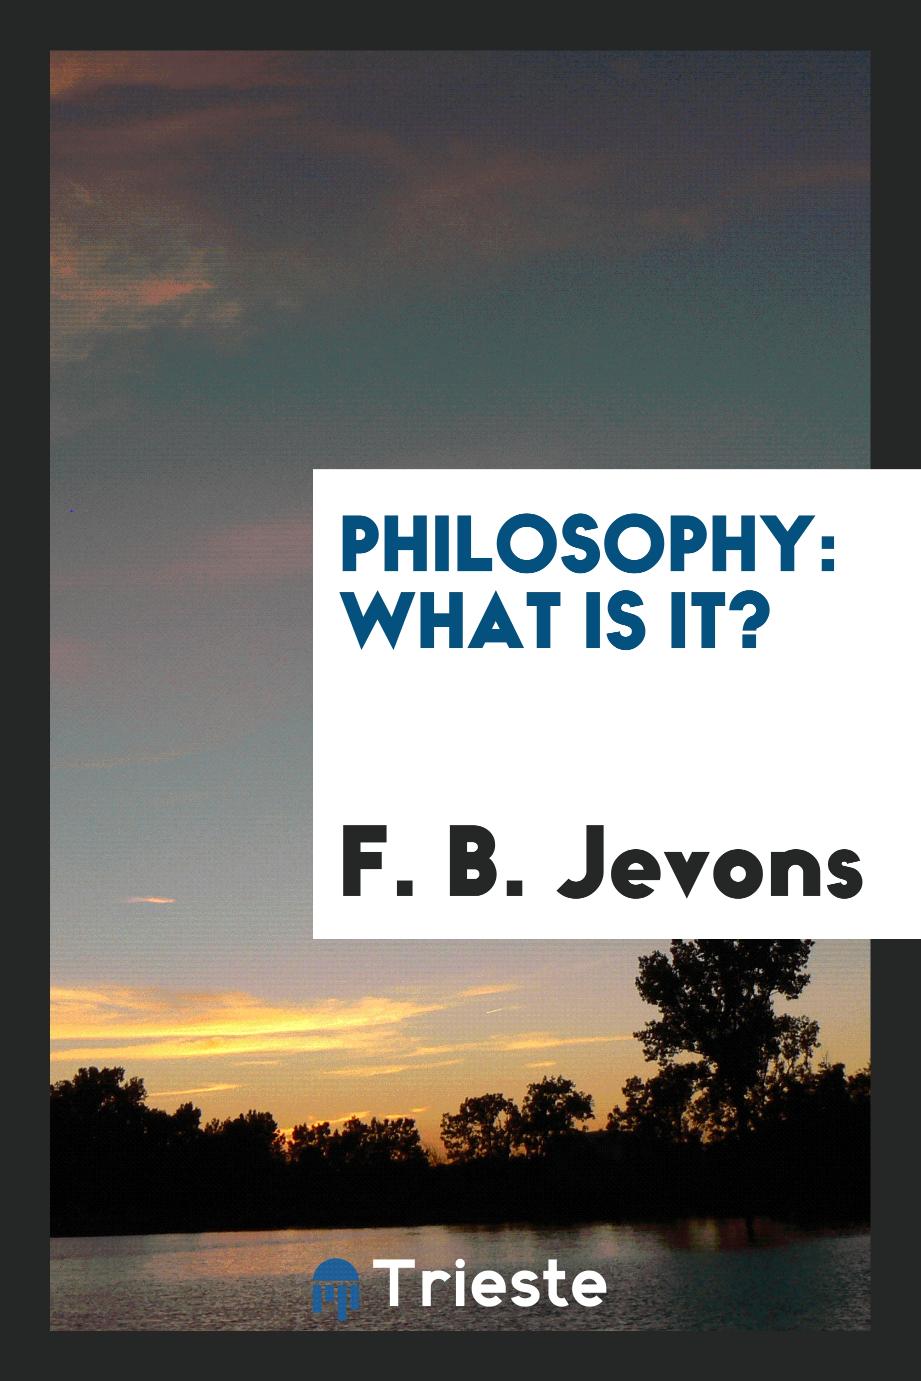 Philosophy: What is It?